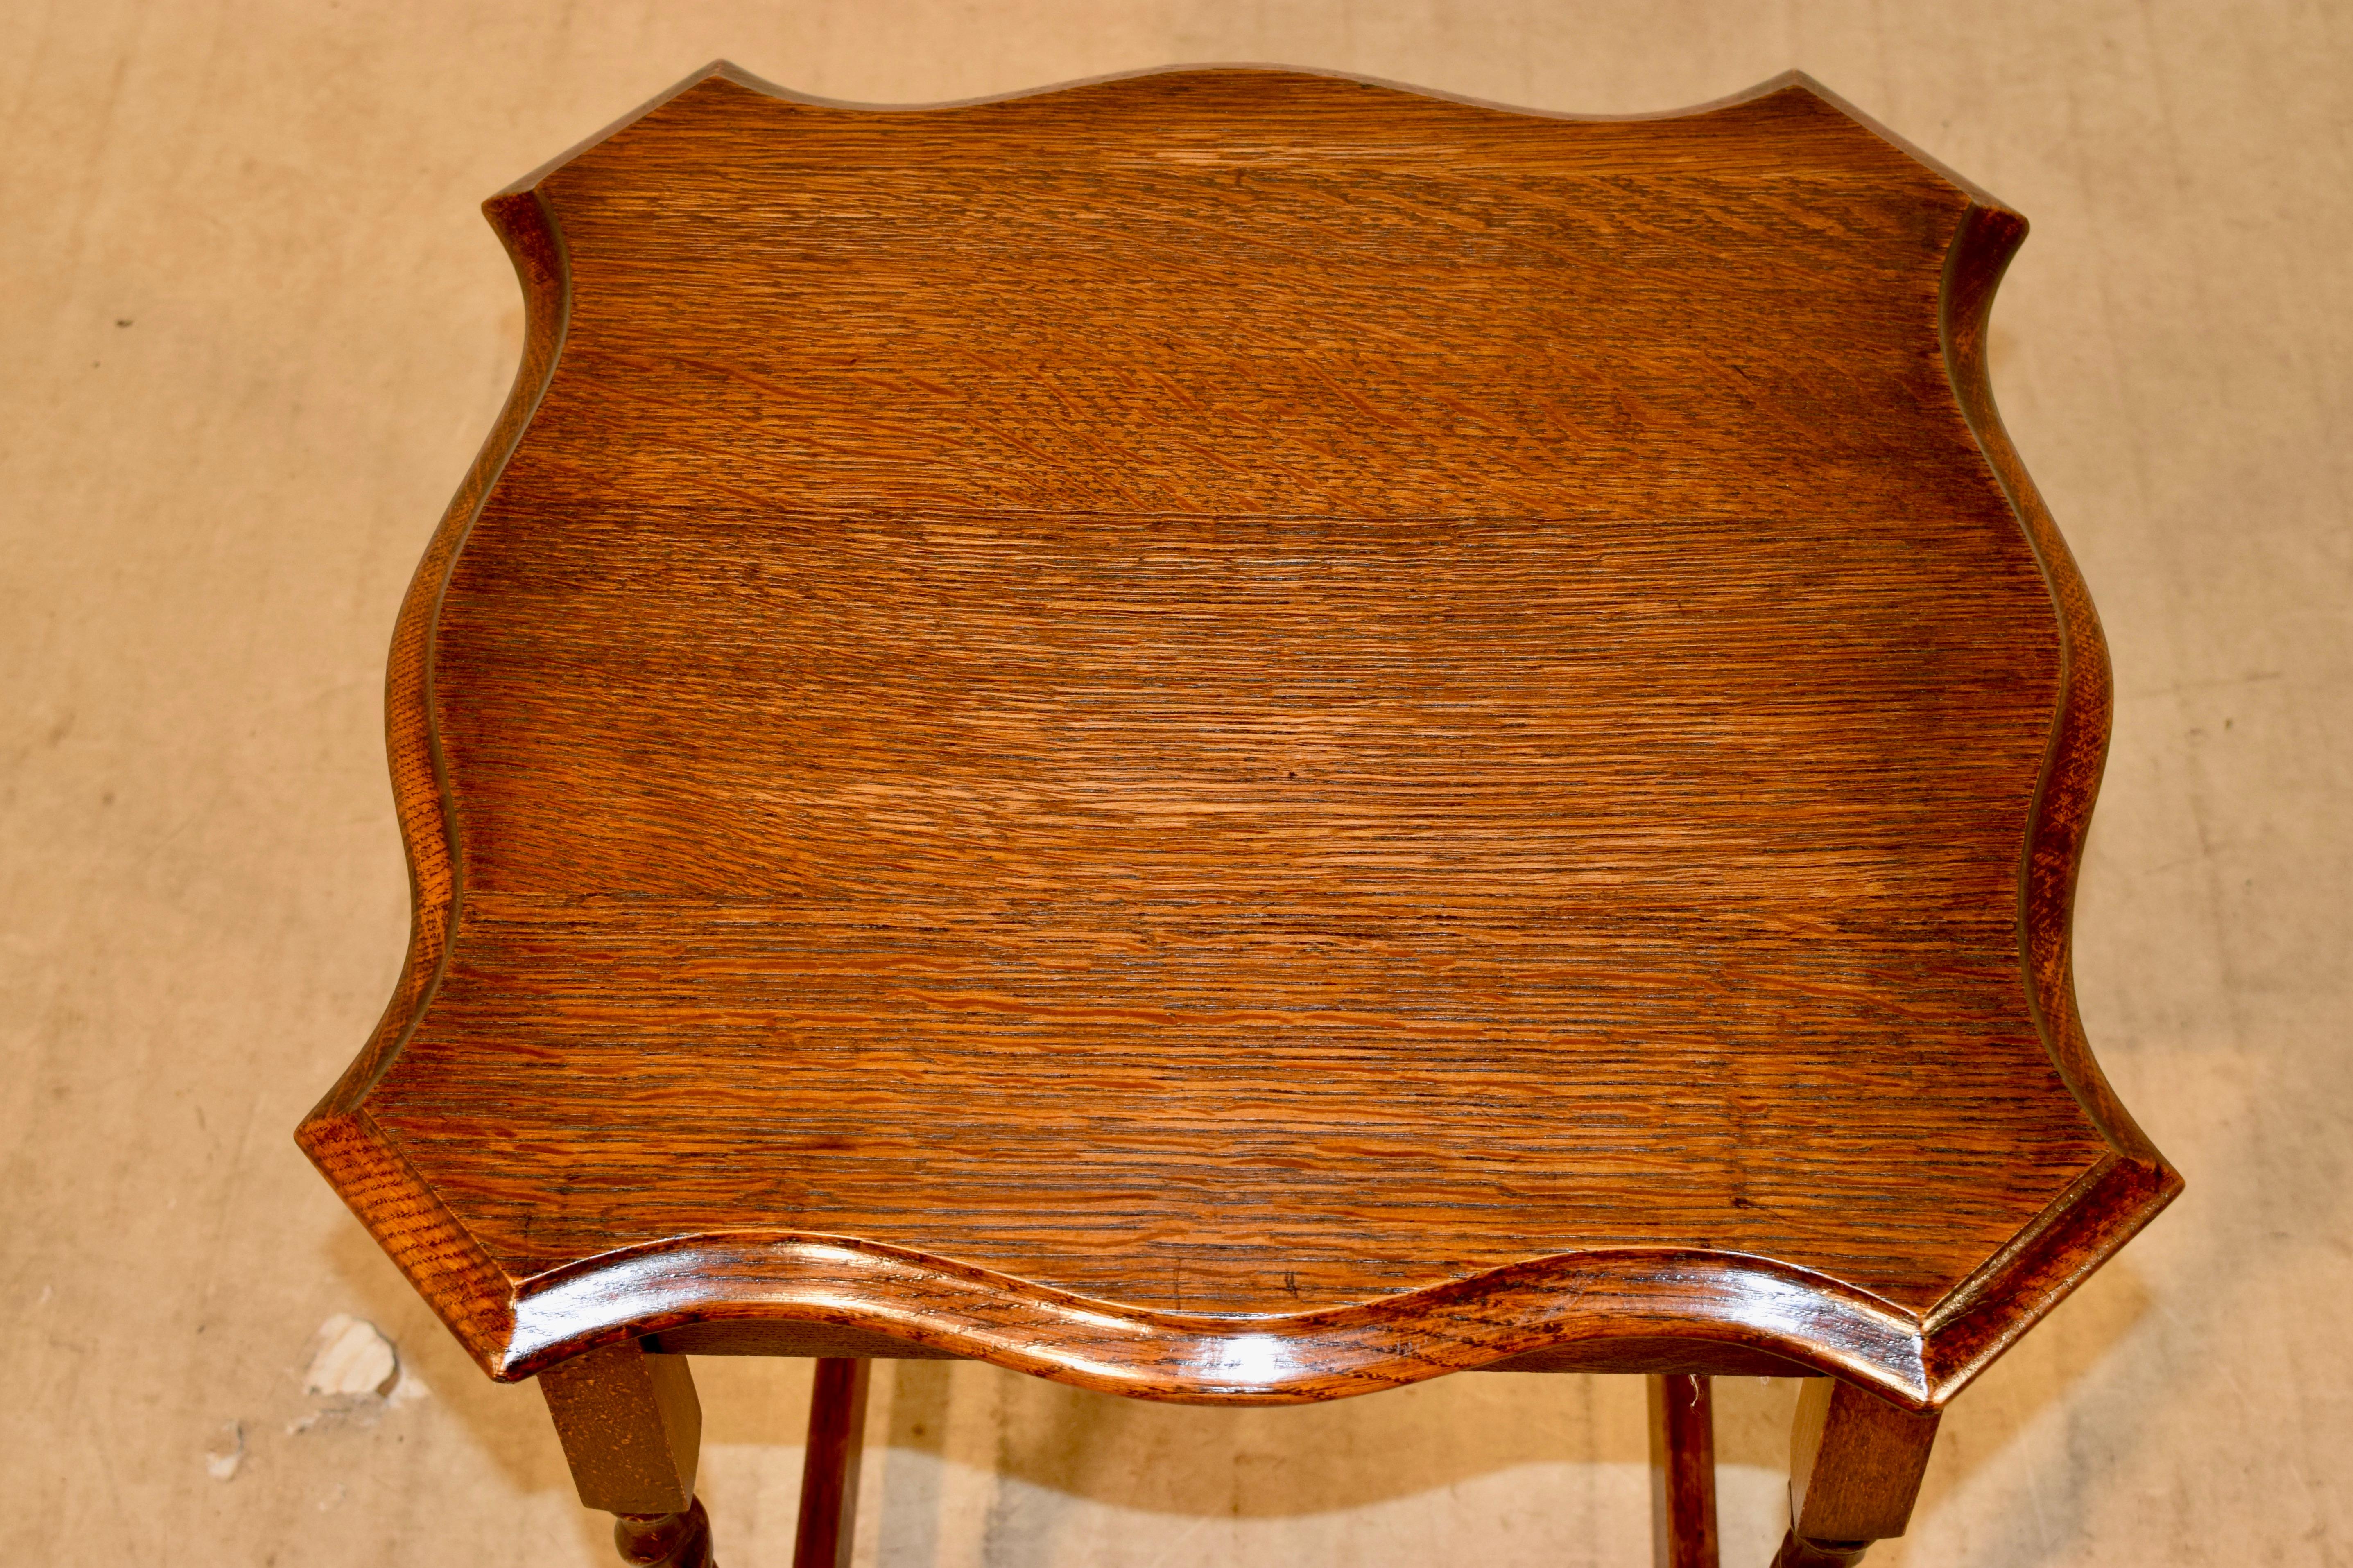 Early 20th Century English Oak Occasional Table, circa 1900